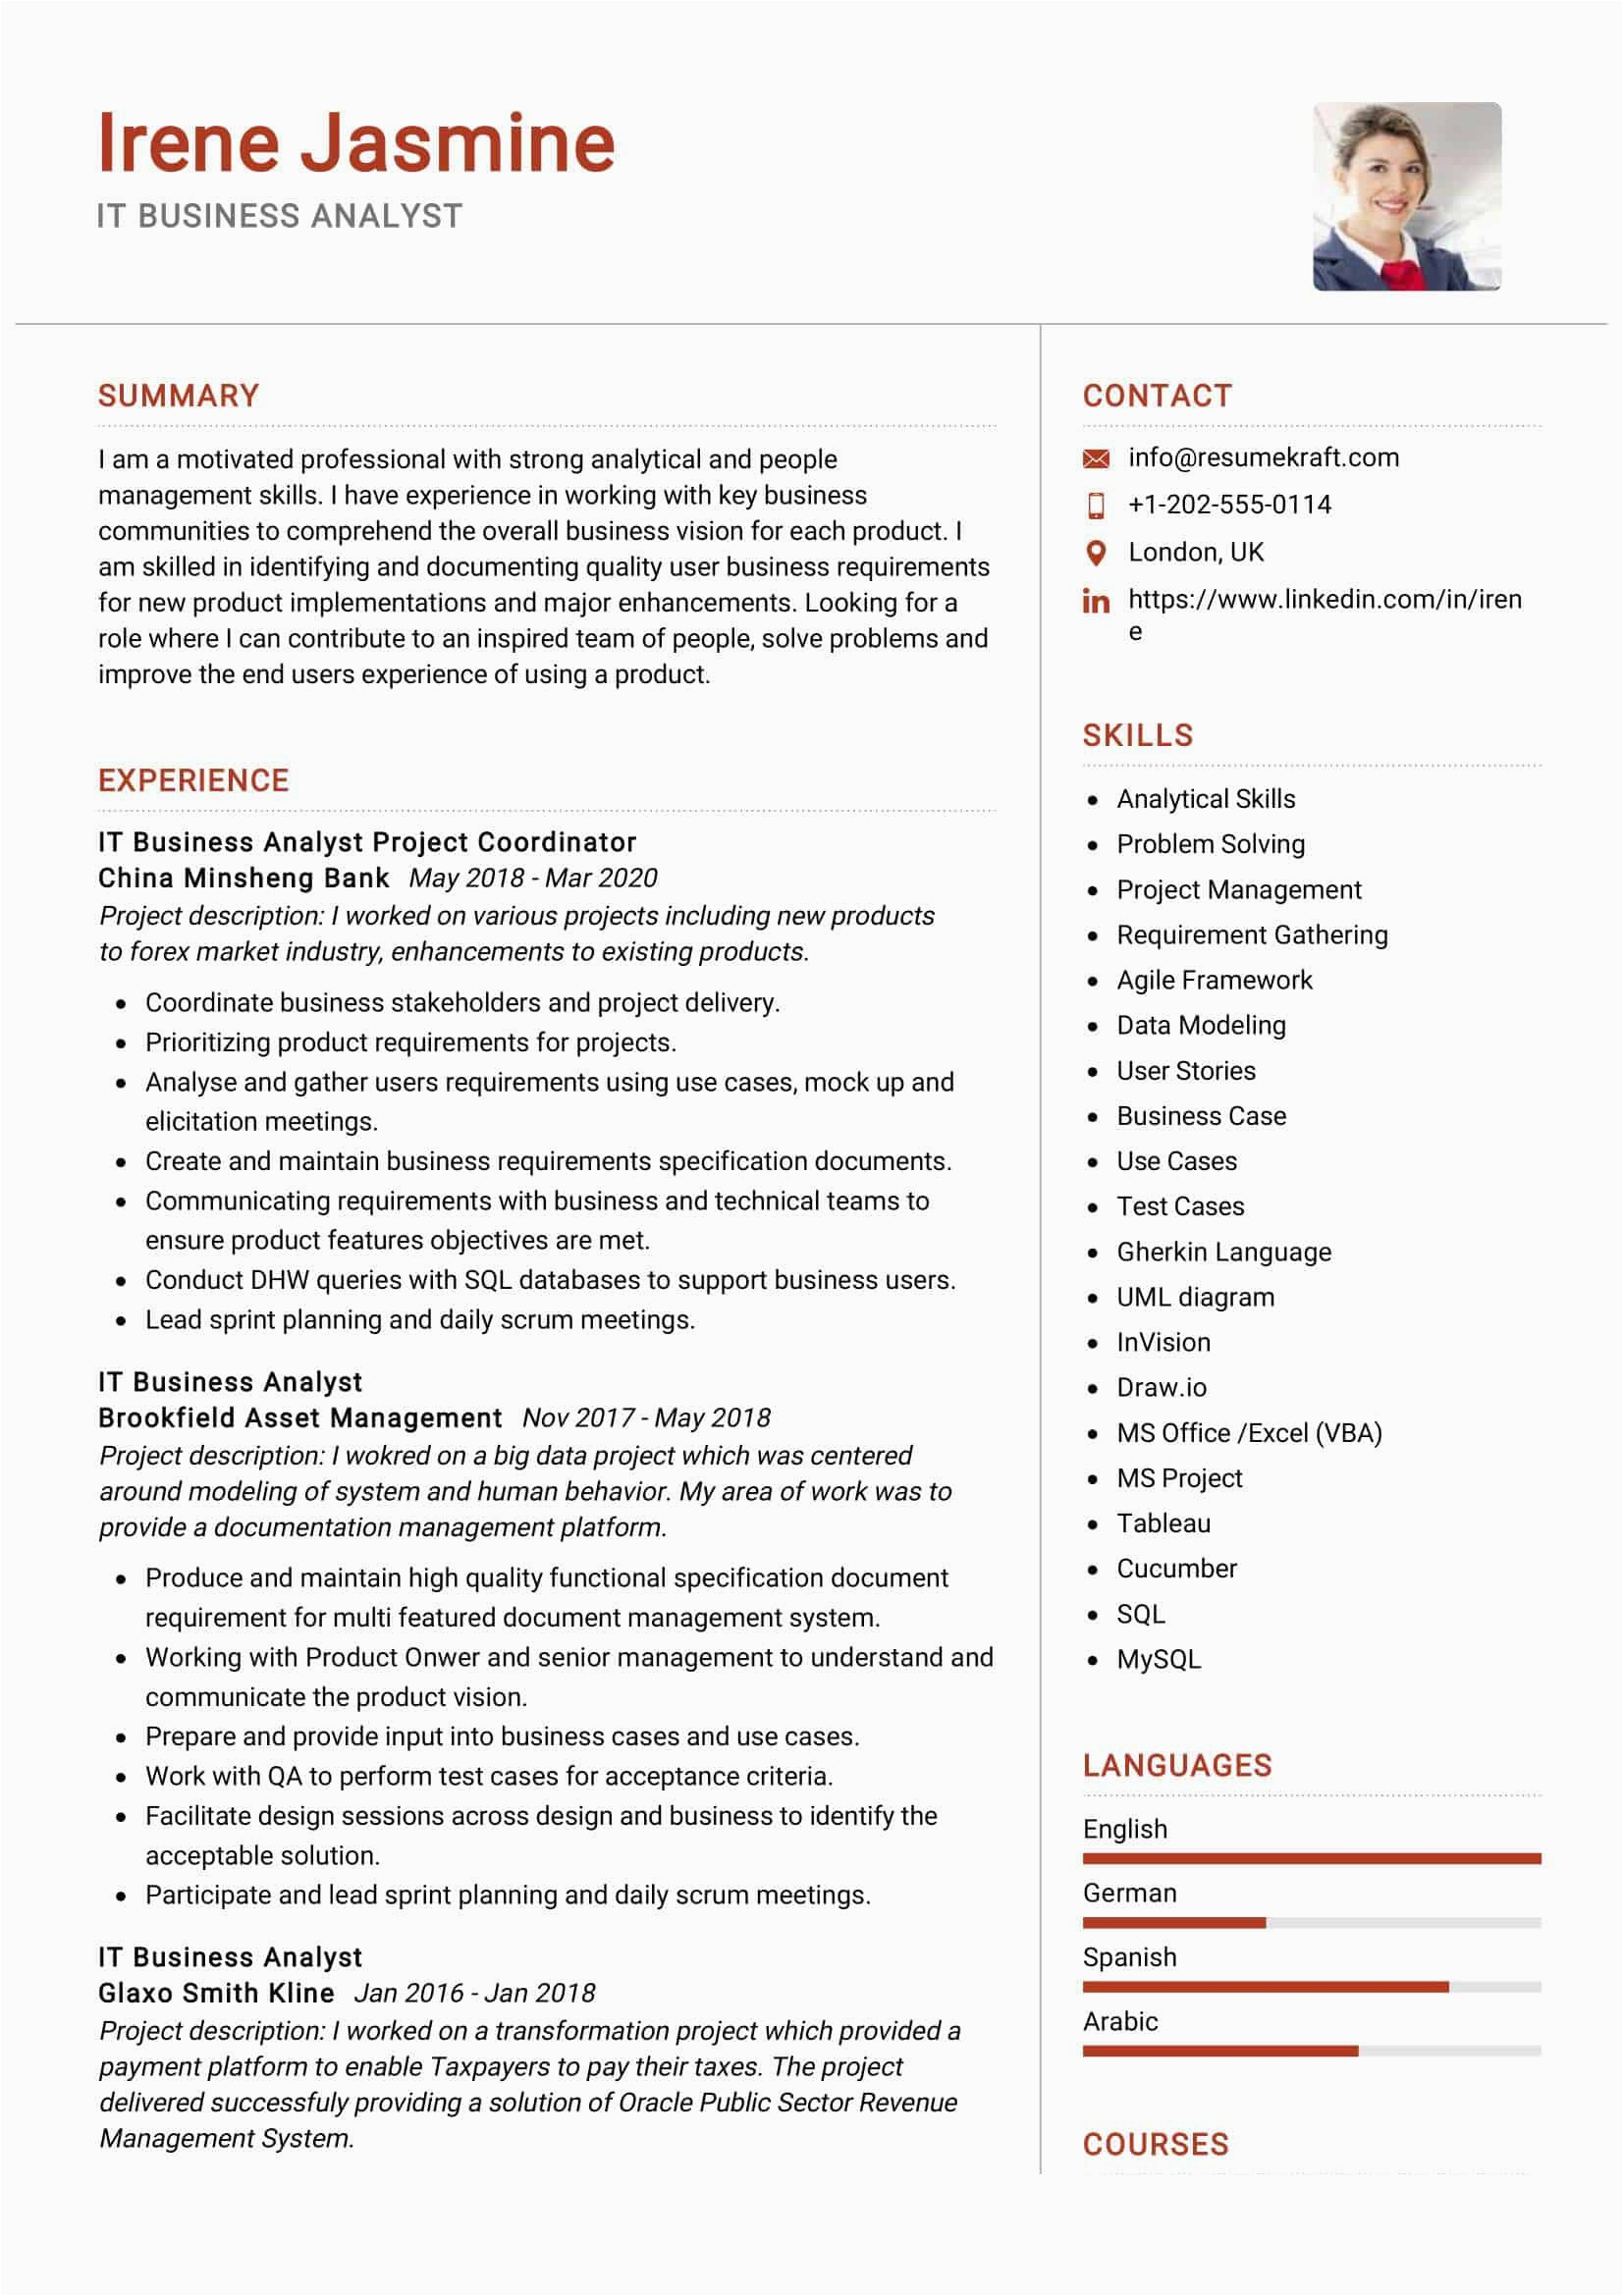 Sample Resume for It Business Analyst Position It Business Analyst Resume Sample 2022